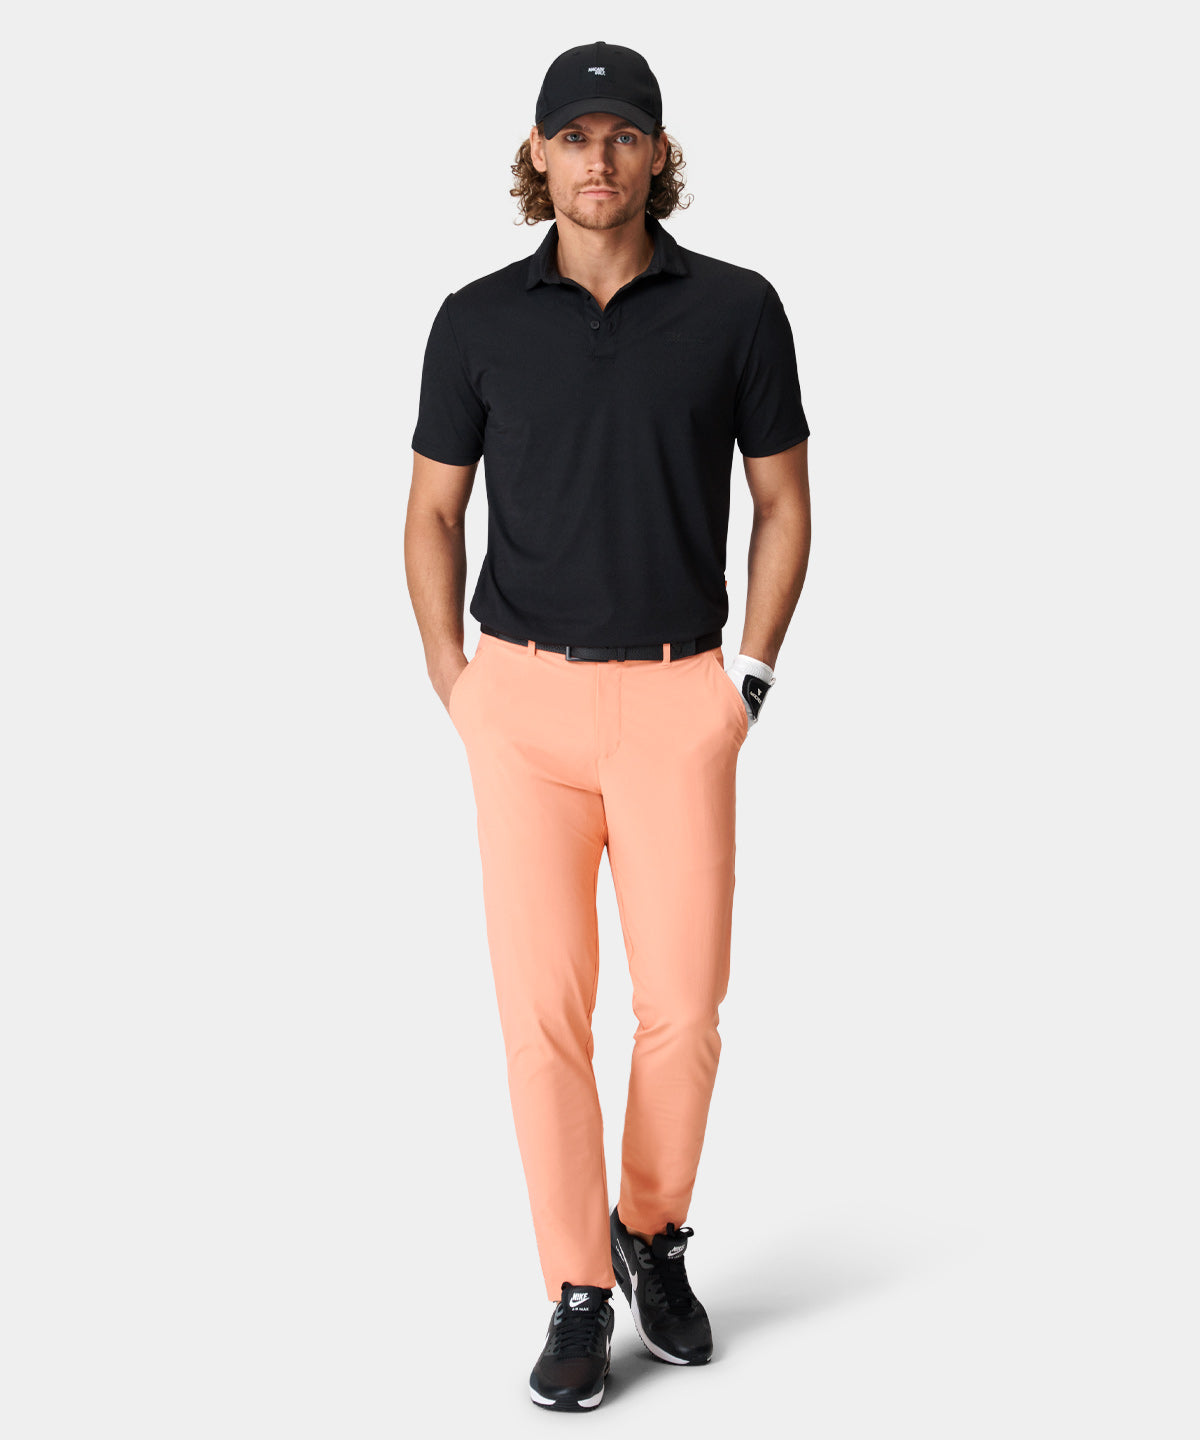 Men's Golf Trousers Quick Drying Long Comfortable Leisure Trousers With  Pockets Lightweight Casual Sports Pants Thin Casual